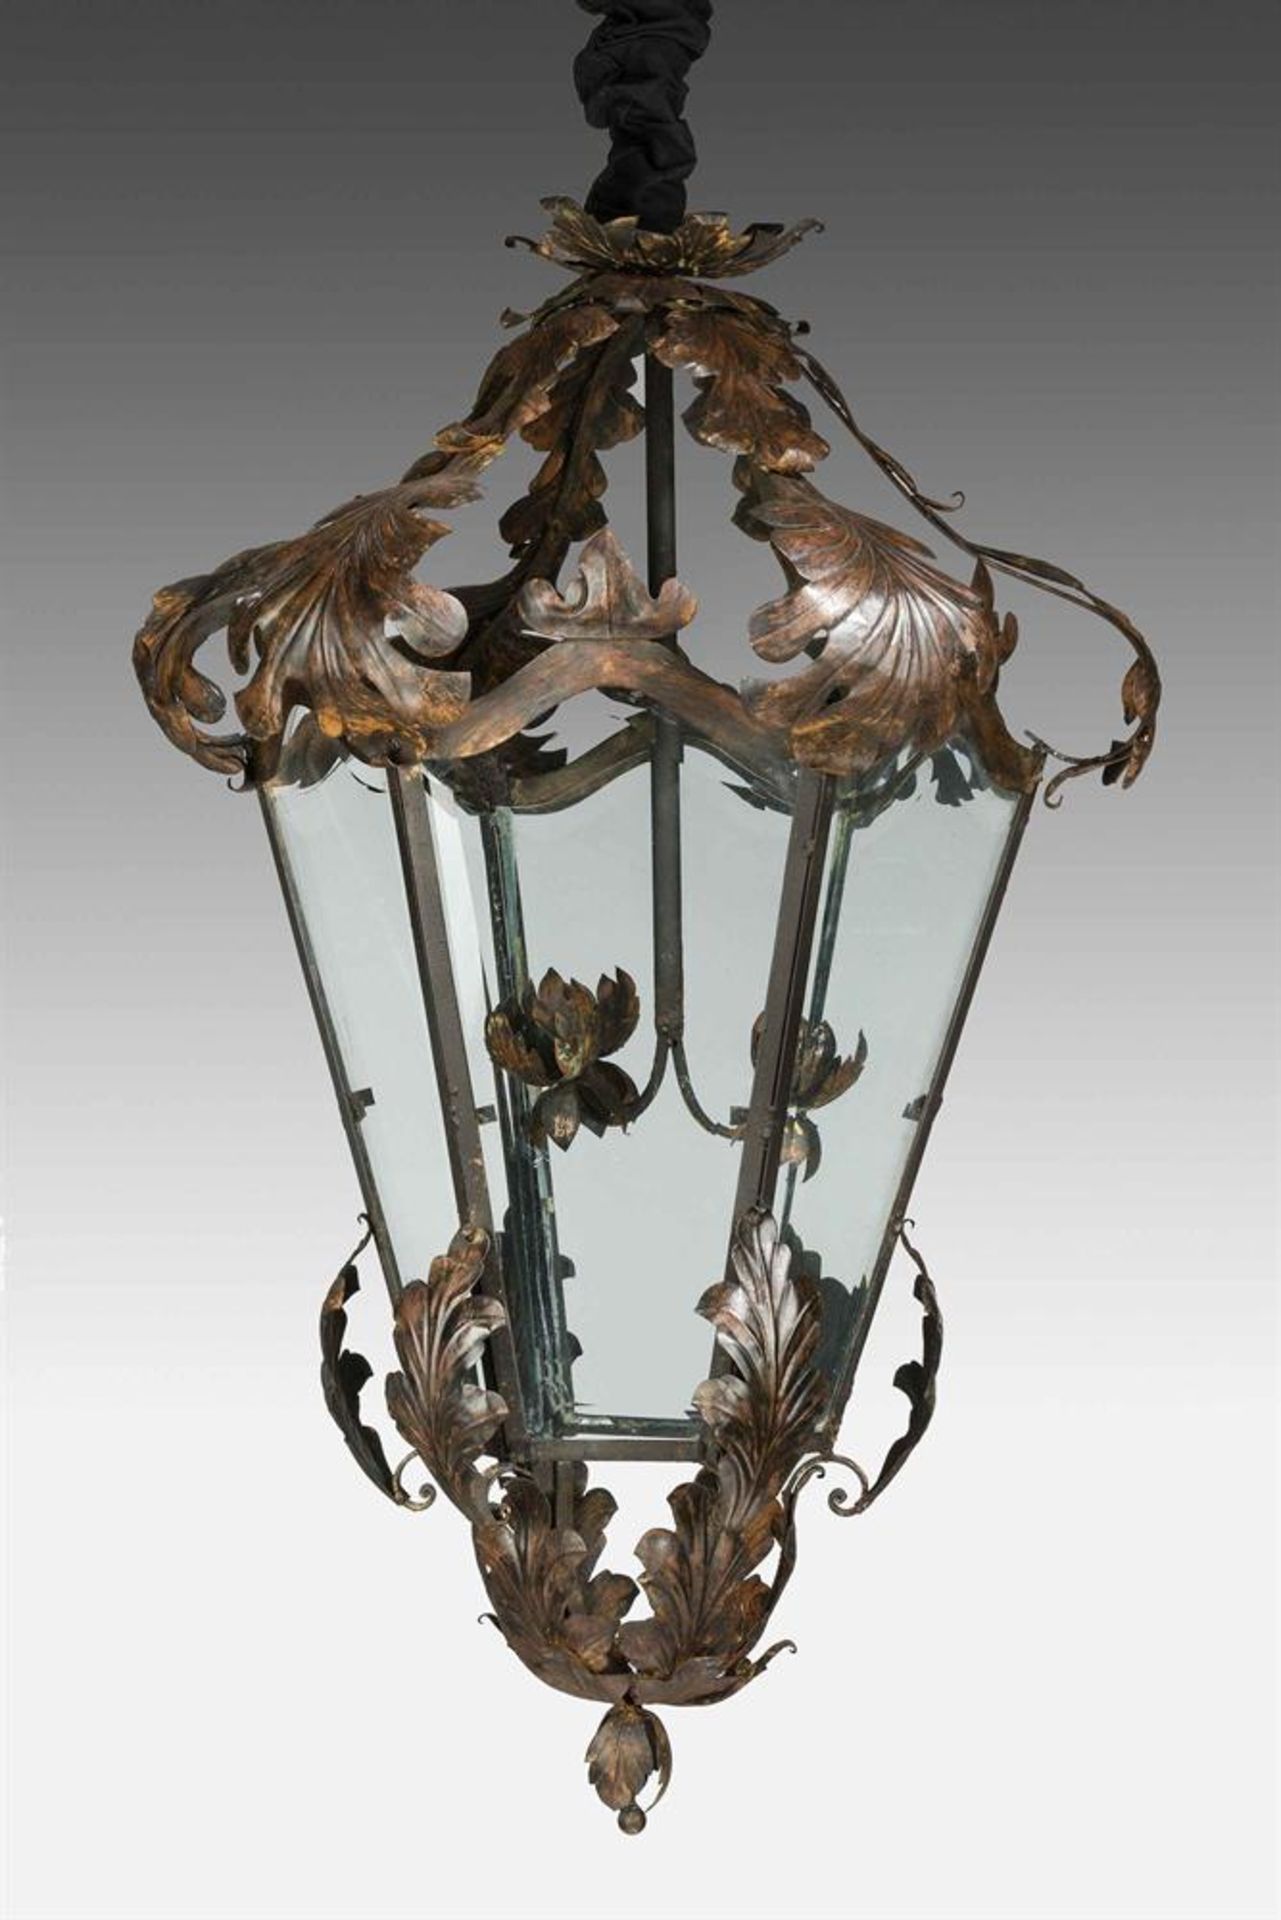 A PAIR OF TOLE FRAMED GLAZED LANTERNS, 20TH CENTURY IN THE ITALIAN 18TH CENTURY STYLE - Image 2 of 5